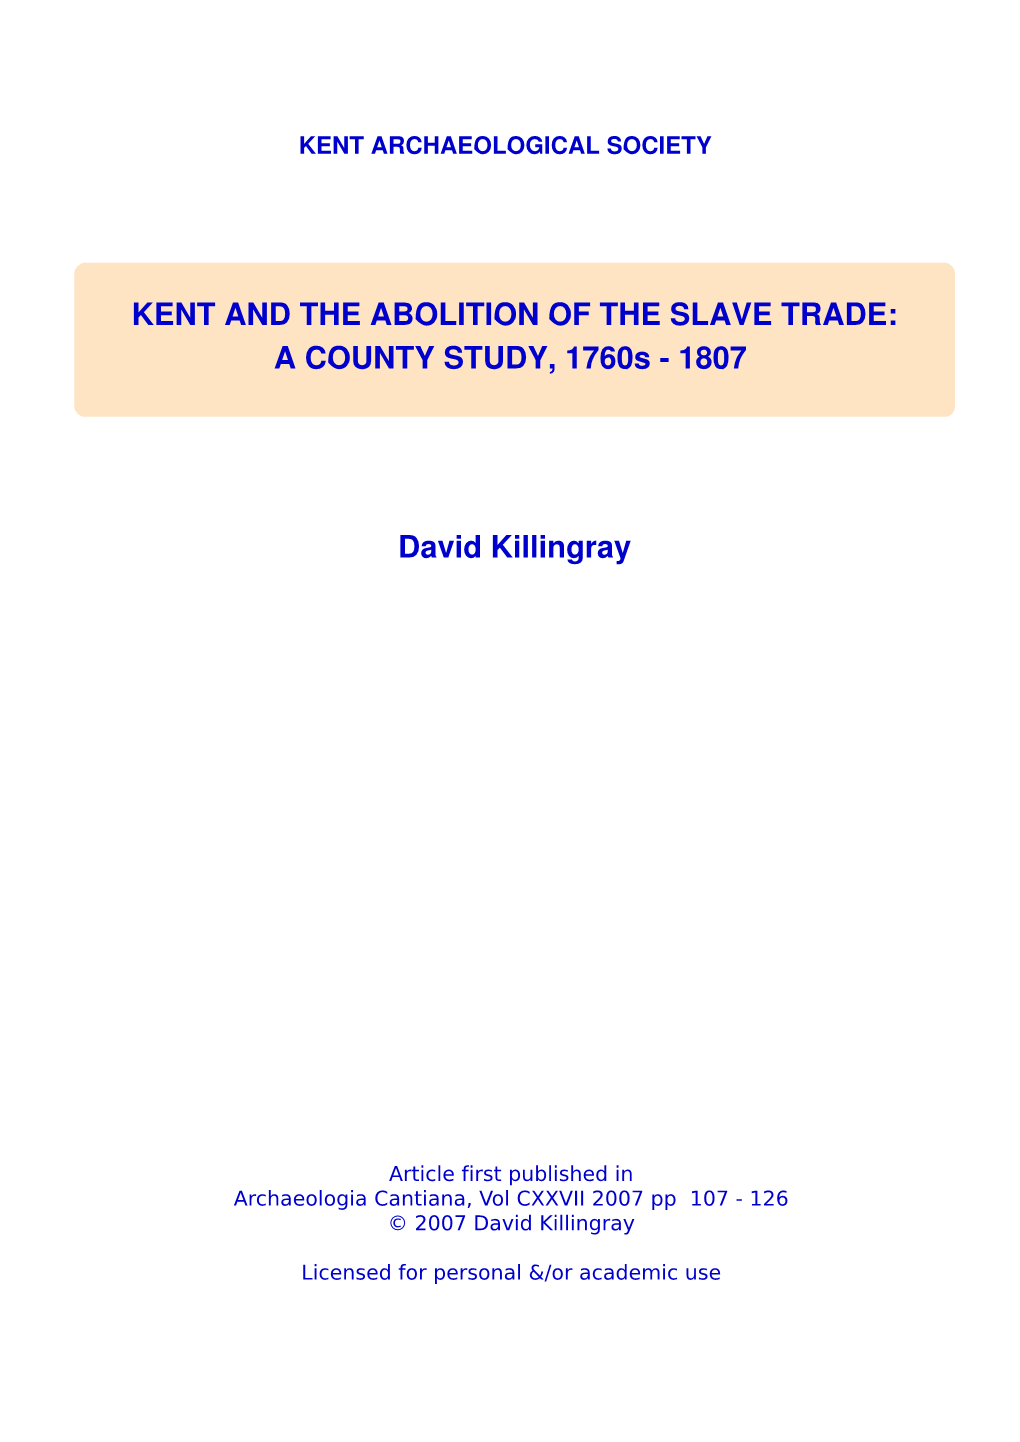 KENT and the ABOLITION of the SLAVE TRADE: a COUNTY STUDY, 1760S - 1807